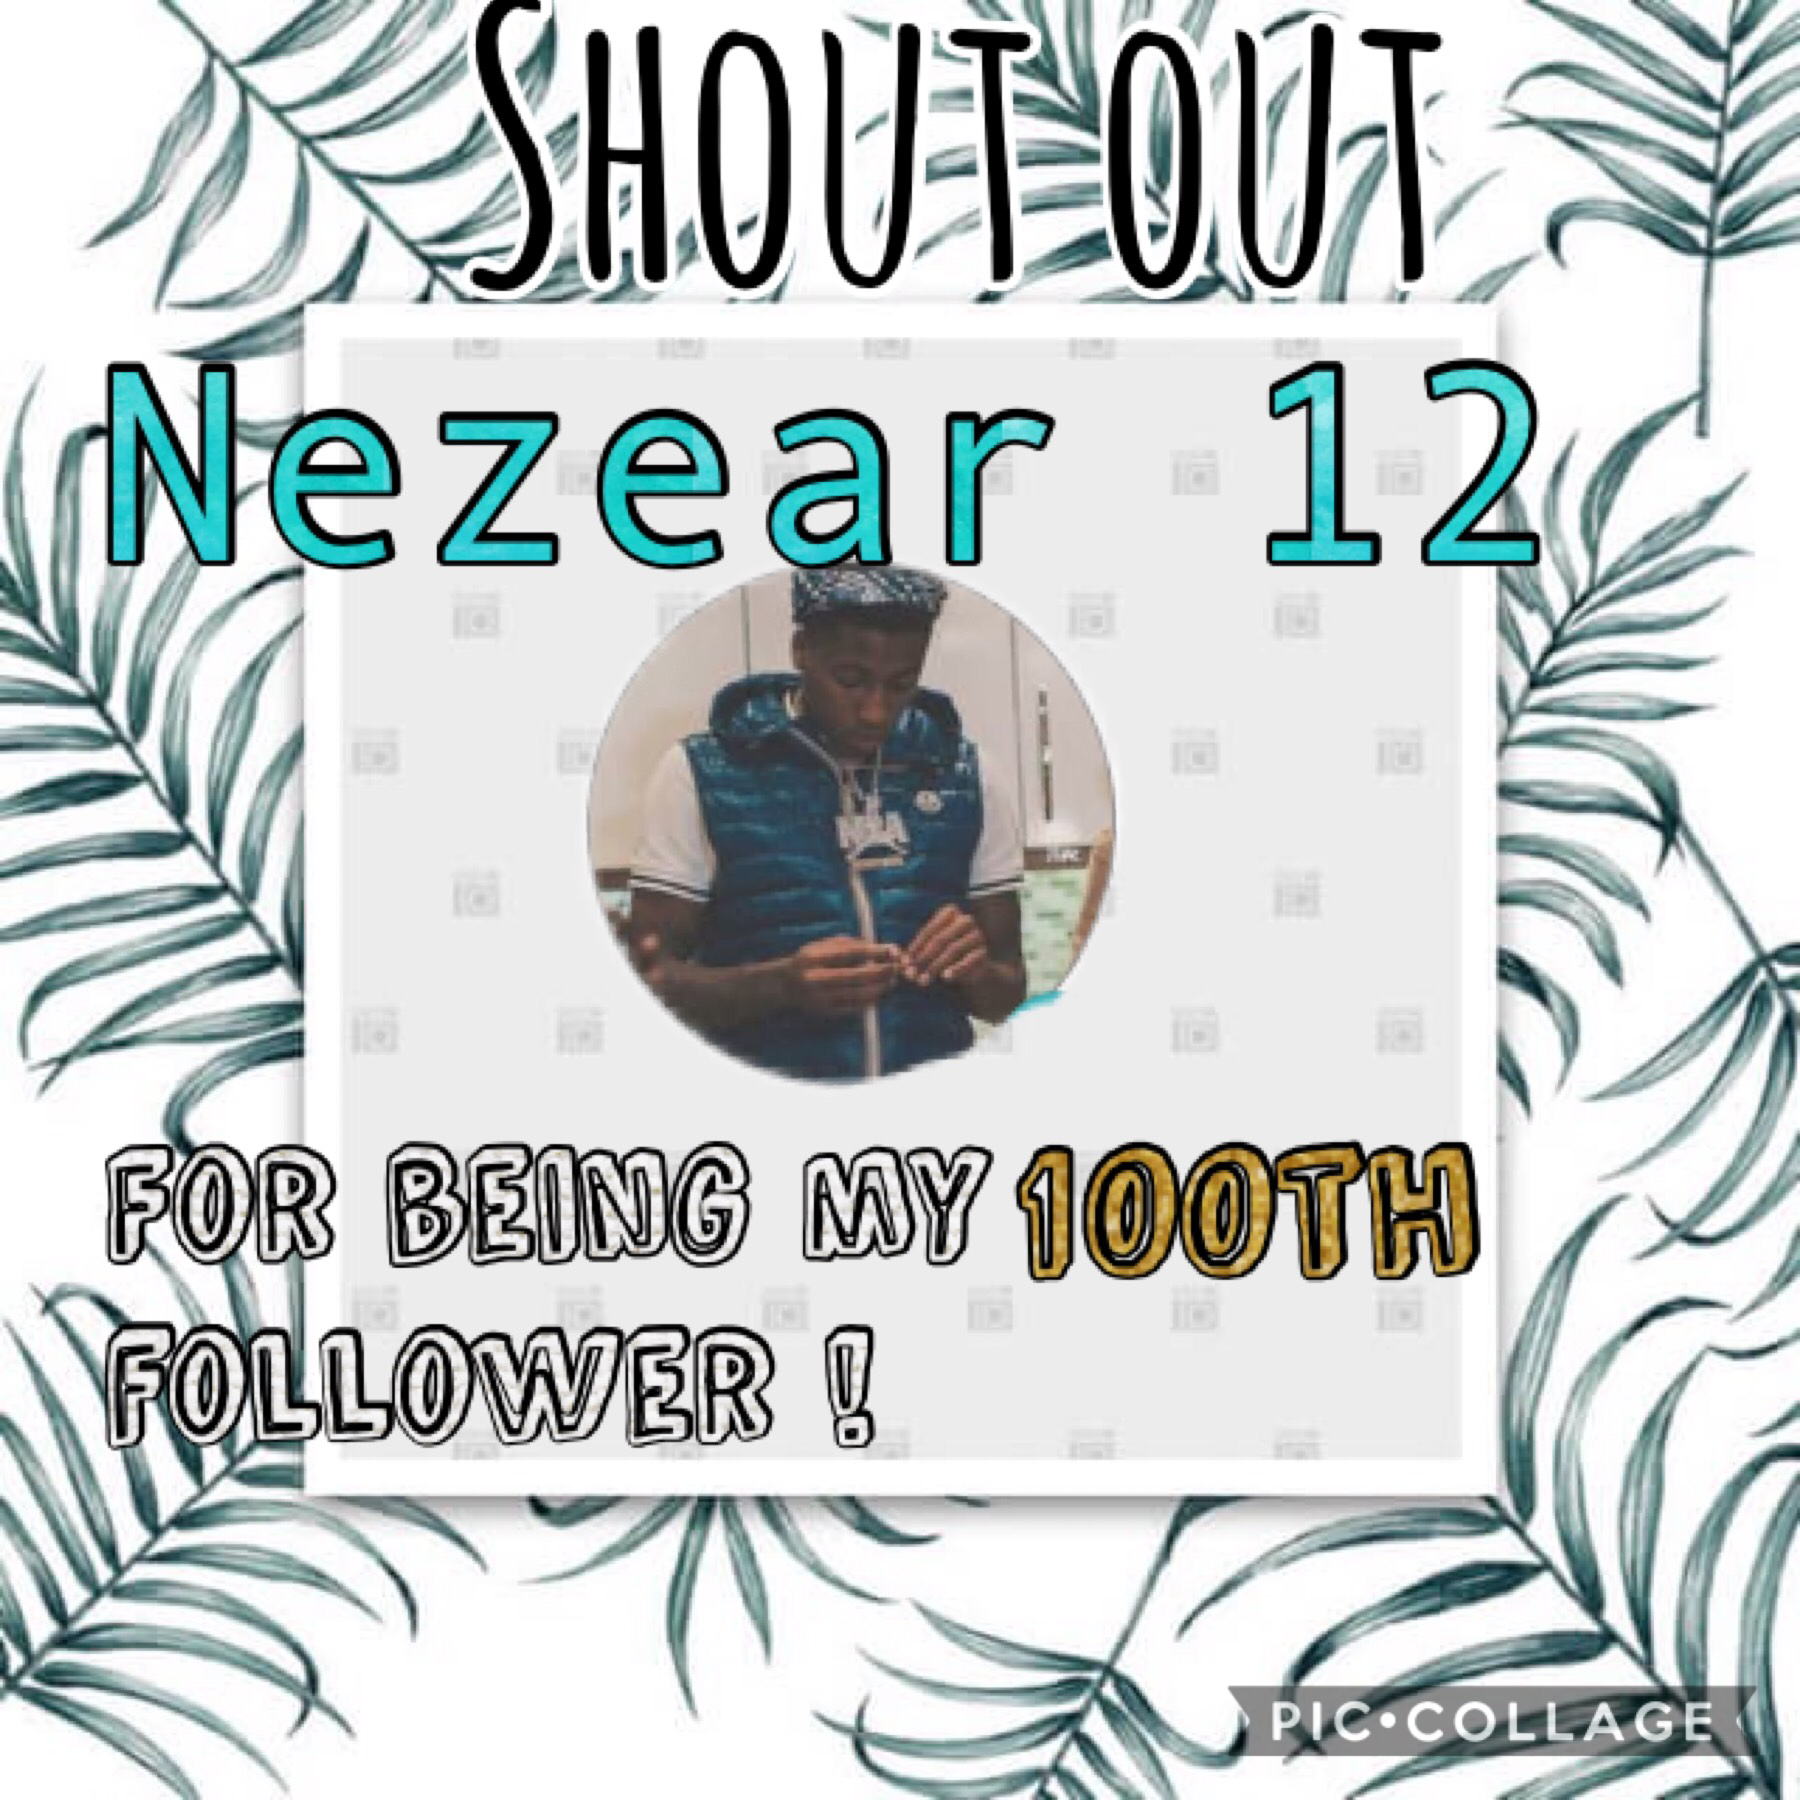 Shout out to nezear 12 for being my 100th follower!